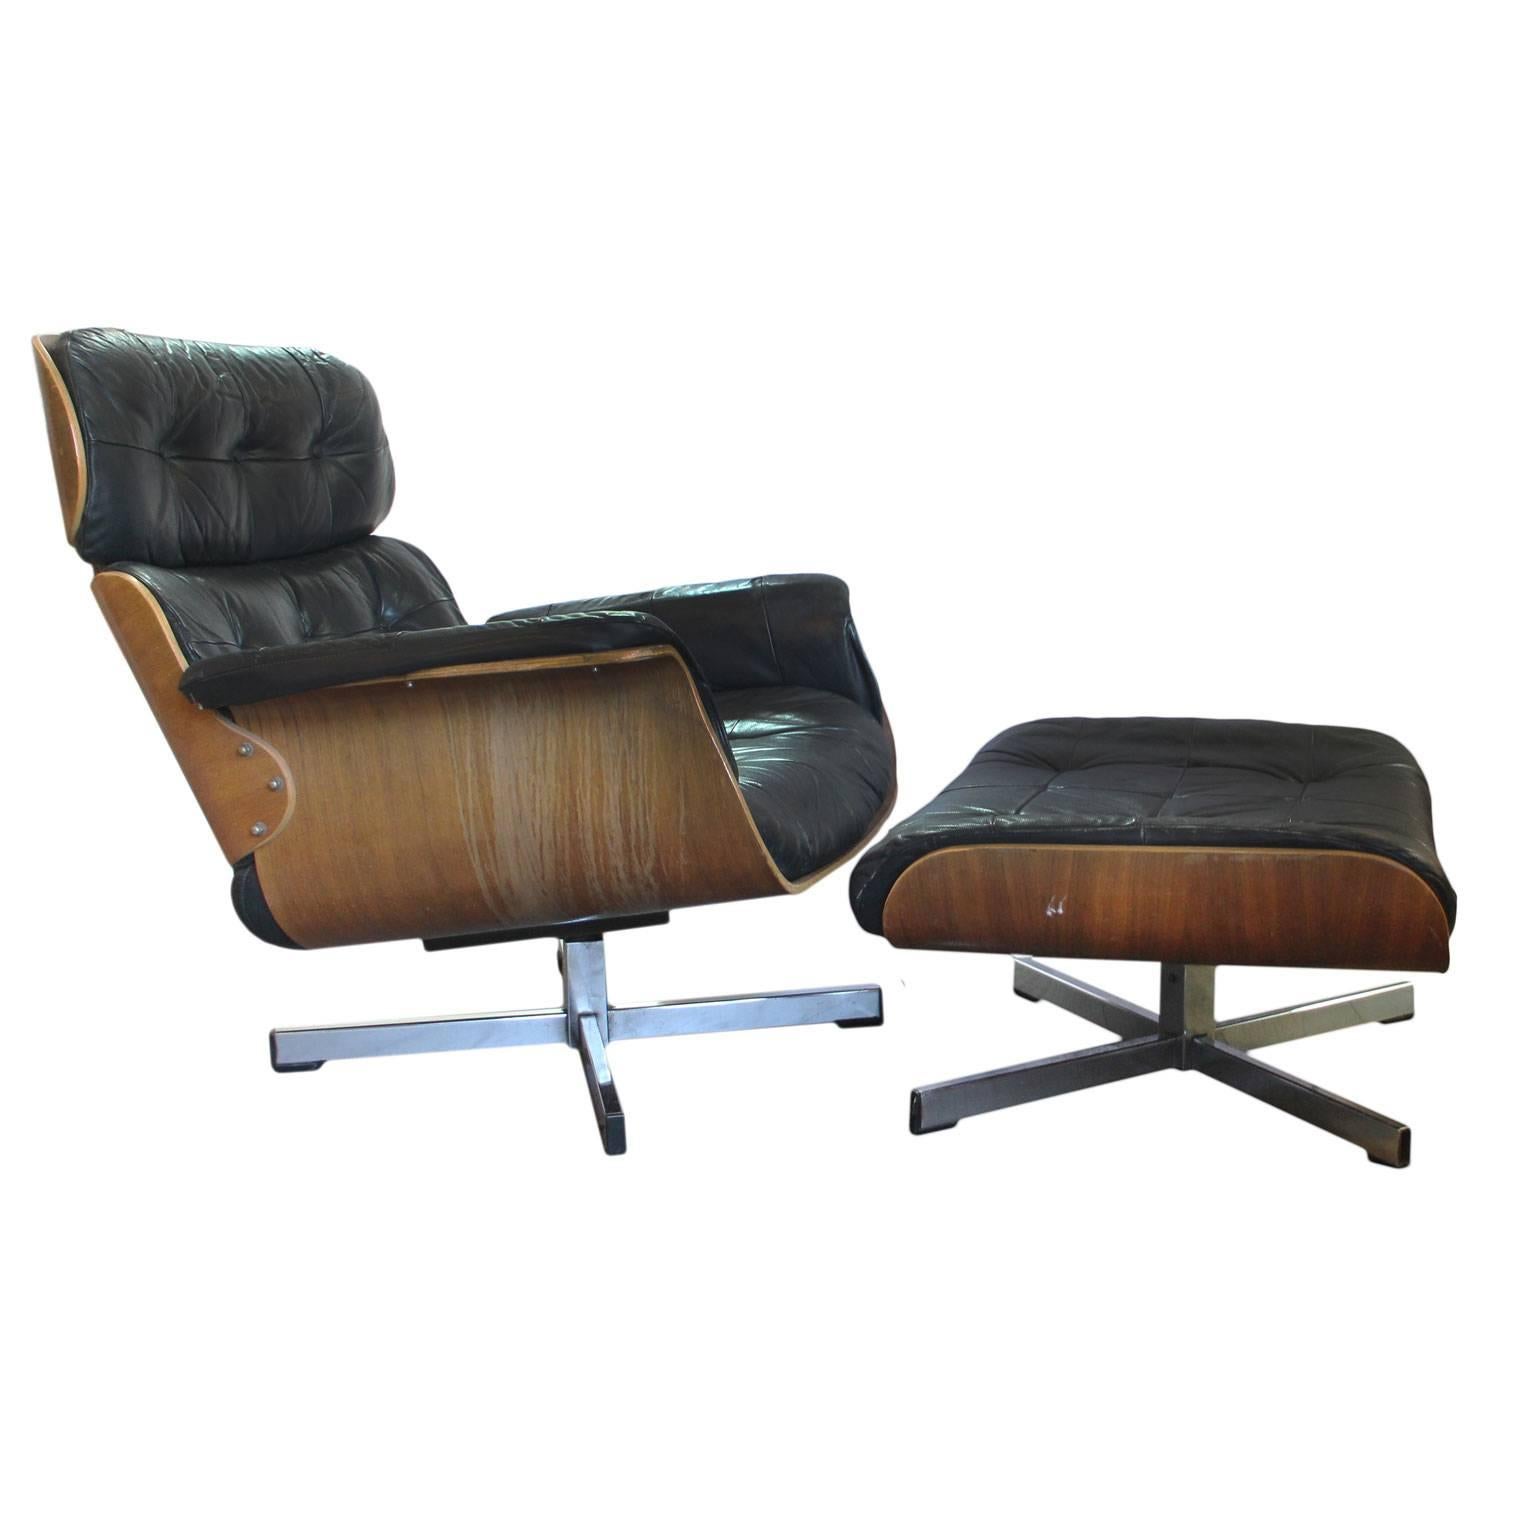 Designed by Scholl, disciple of Charles and Ray Eames.